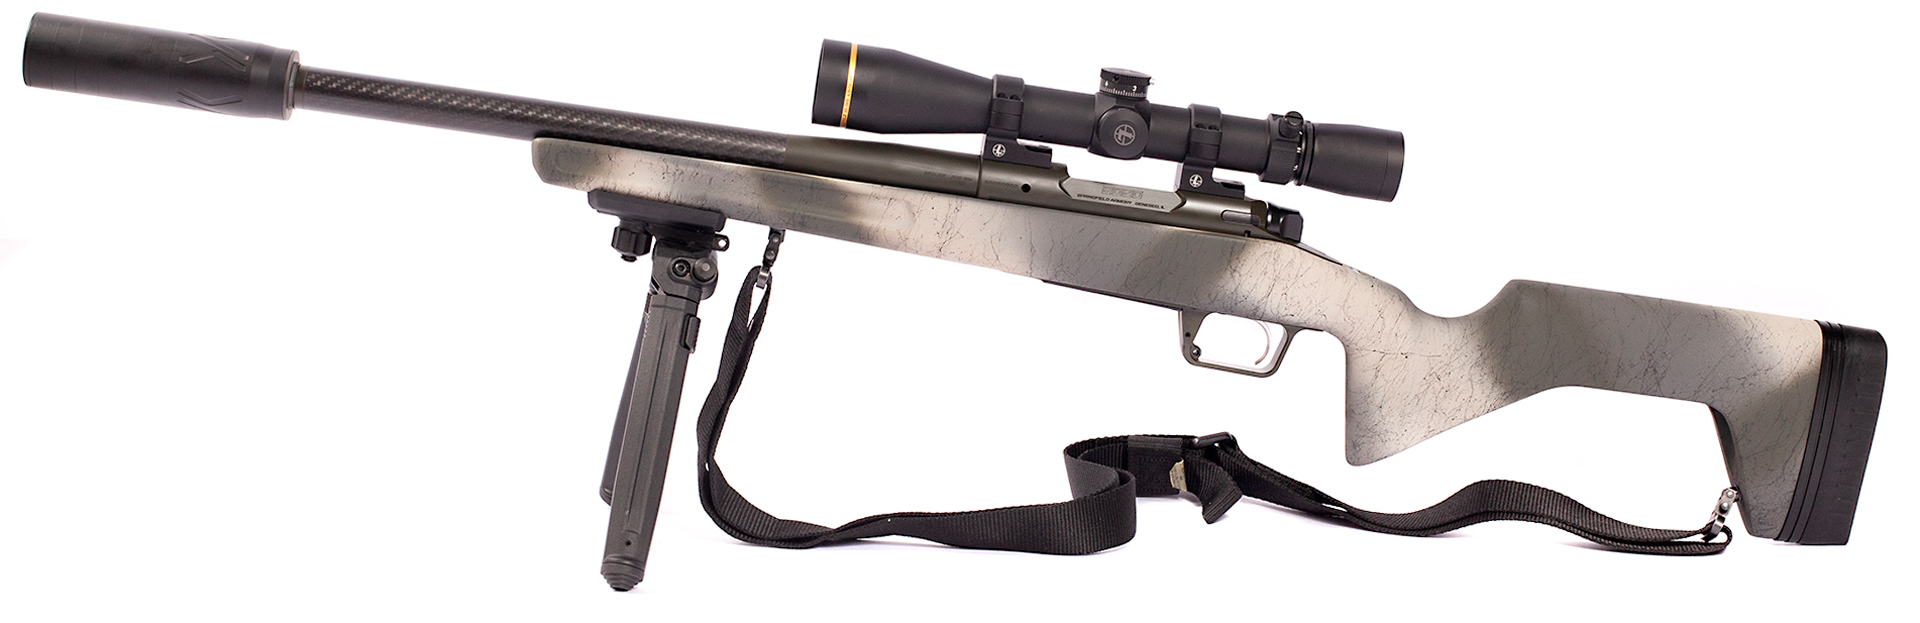 Springfield Armory Redline bolt-action hunting rifle left-side view with gear including suppressor bipod sling riflescope